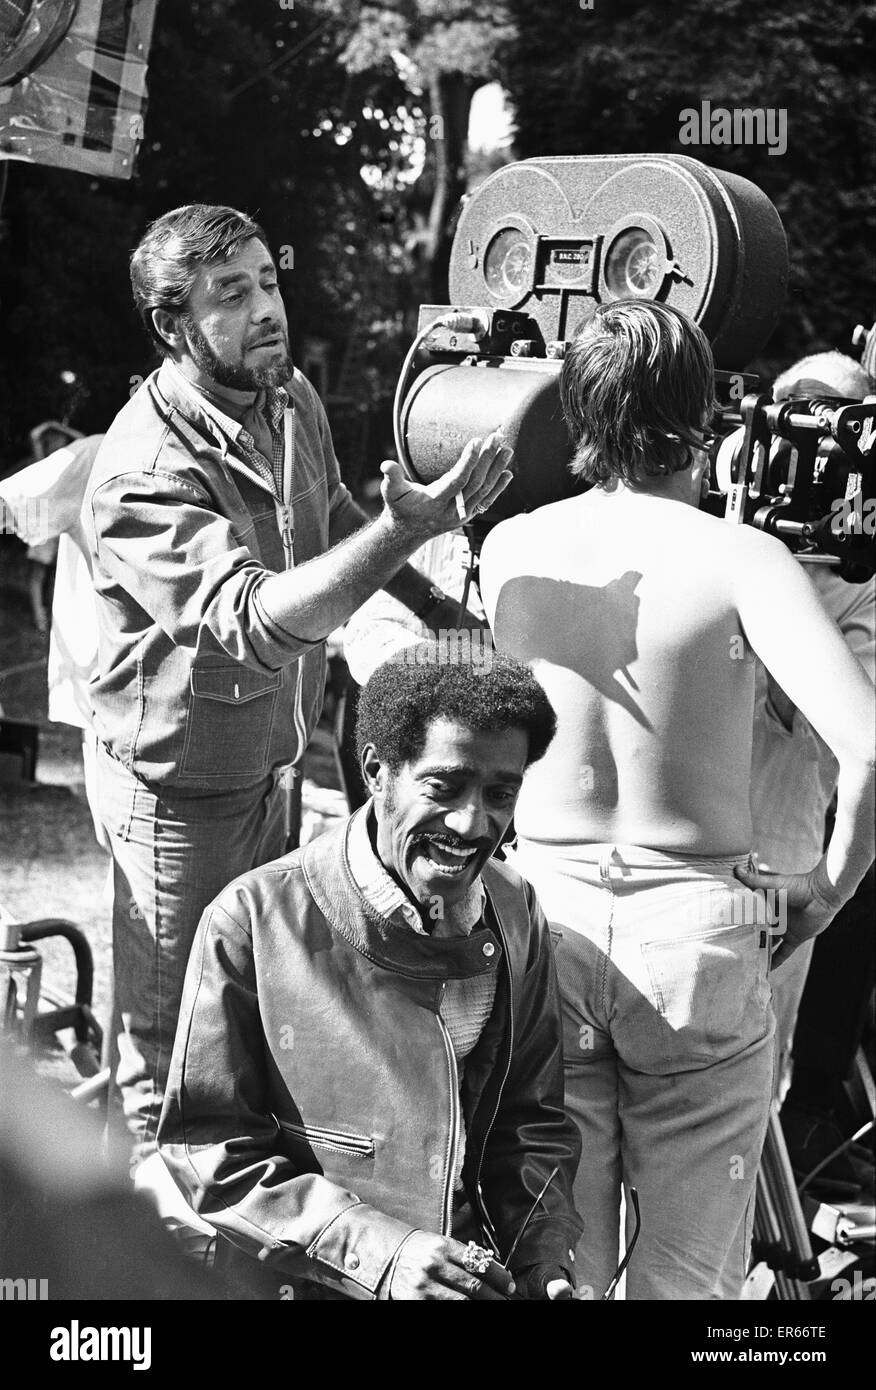 Director Jerry Lewis (left) seen here with Sammy Davis Junior (seated) setting up for the next series of shots at Eastnor Castle, Ledbury. Where they are filming One More Time. Circa 1st August 1969 Stock Photo